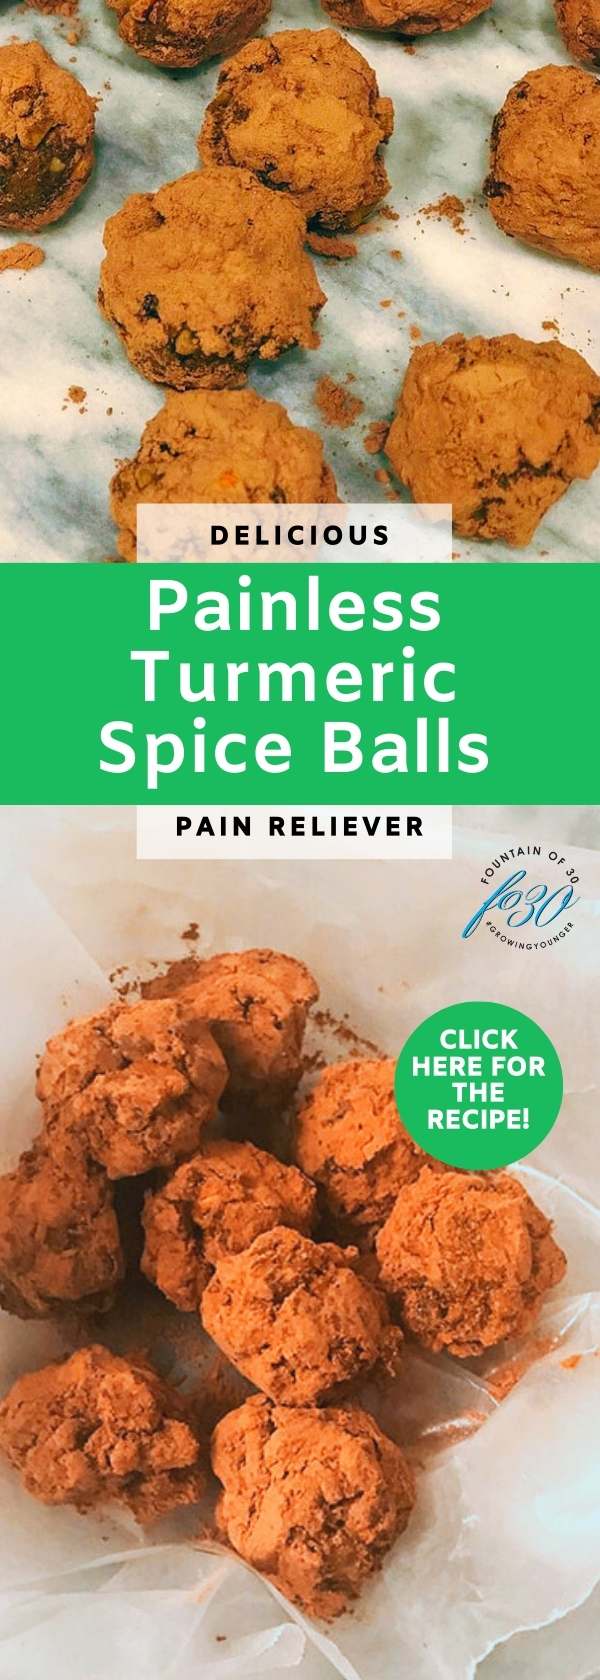 Turmeric Holiday Spice Balls for Pain Relief fountainof30